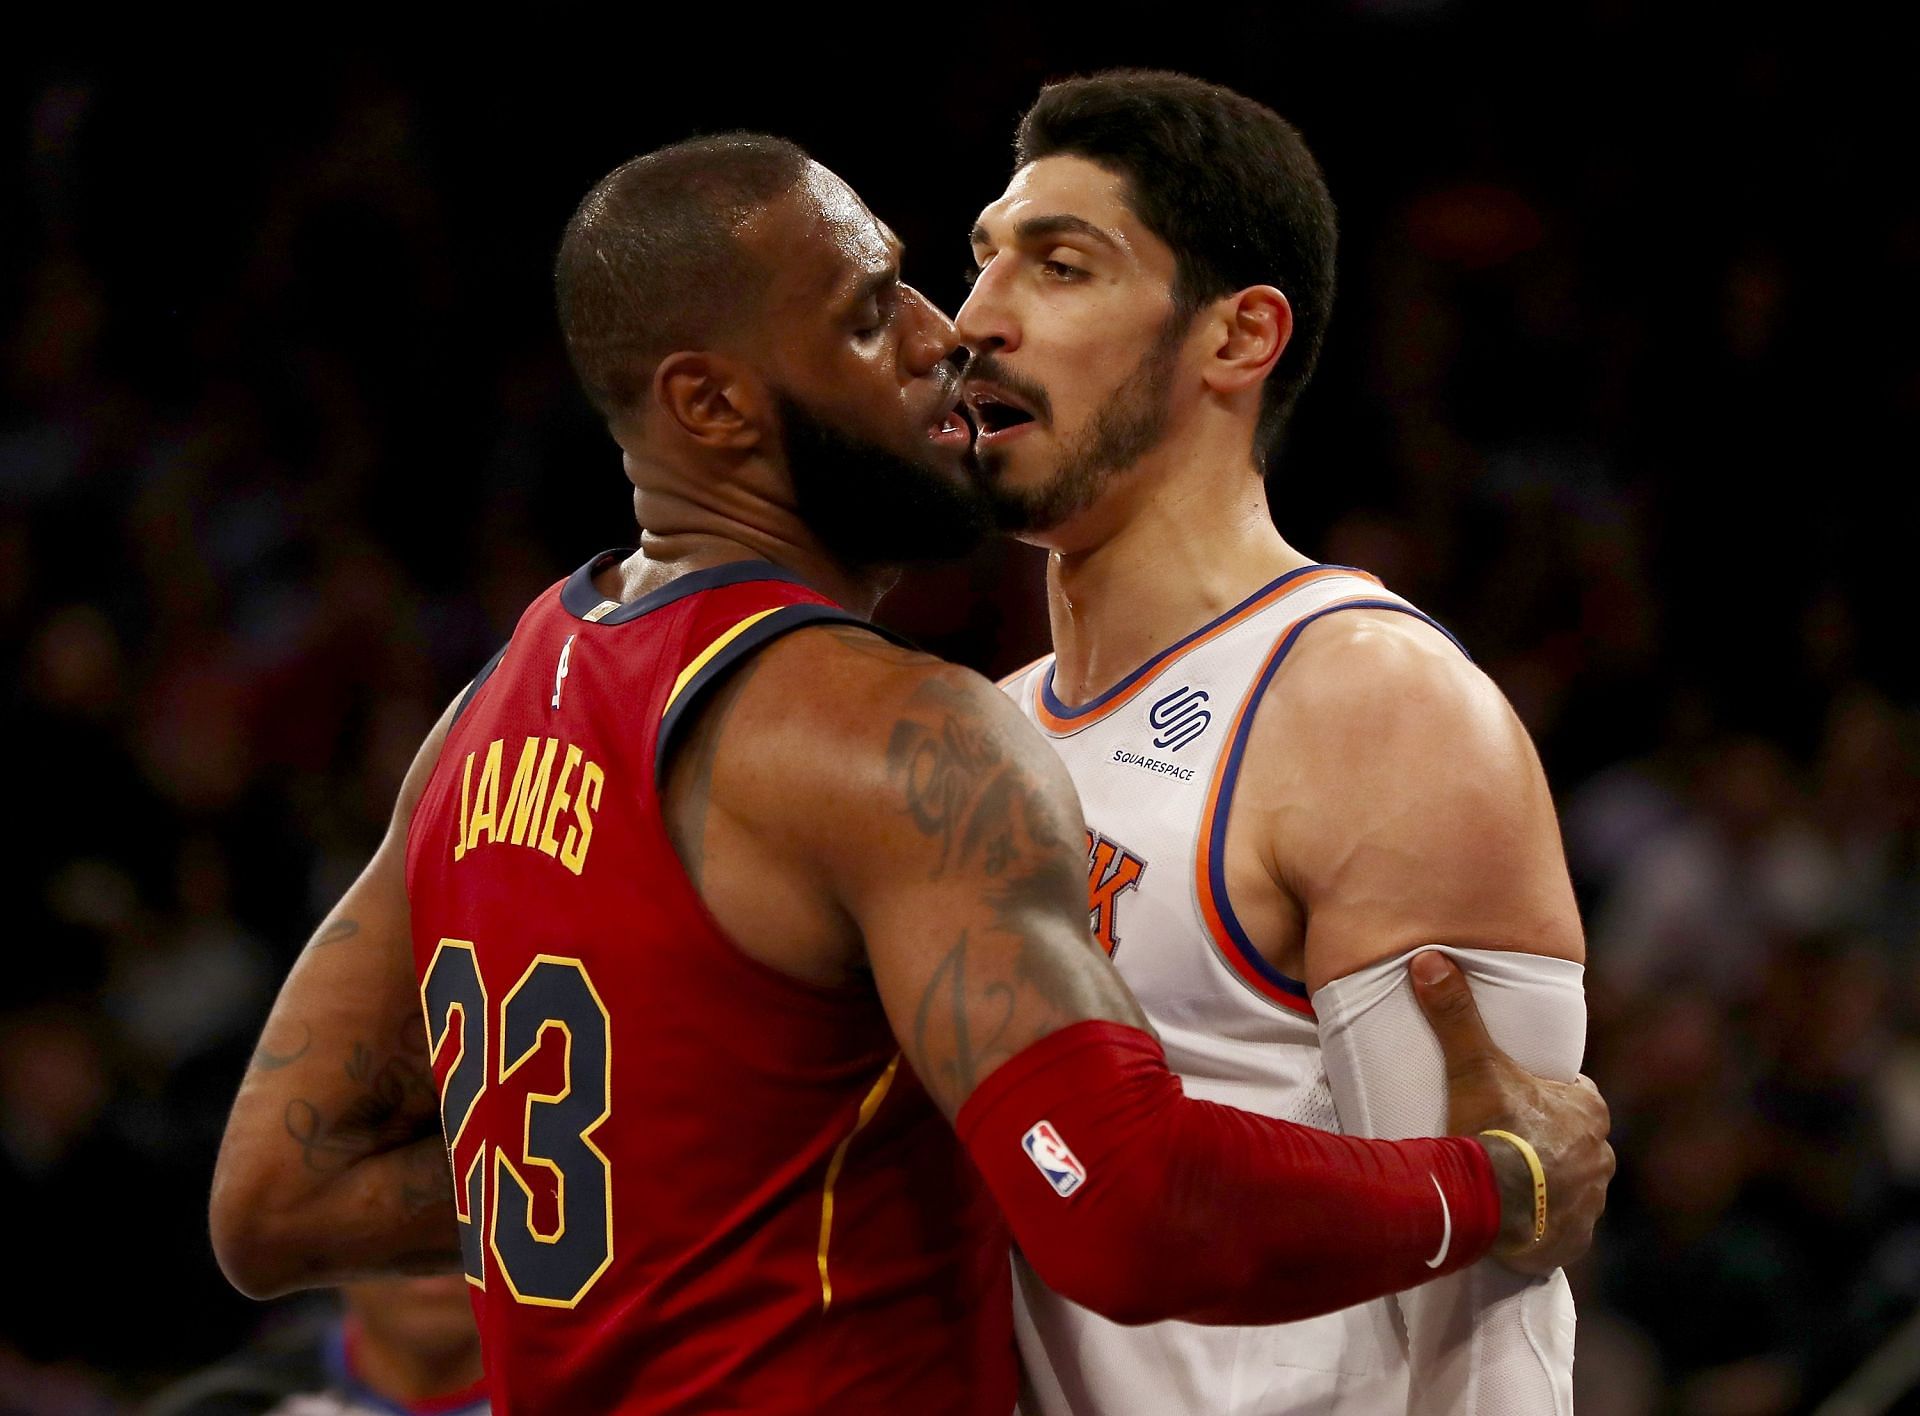 LeBron James #23 of the Cleveland Cavaliers and Enes Kanter #00 of the New York Knicks exchange words in the first half at Madison Square Garden on November 13, 2017 in New York City.